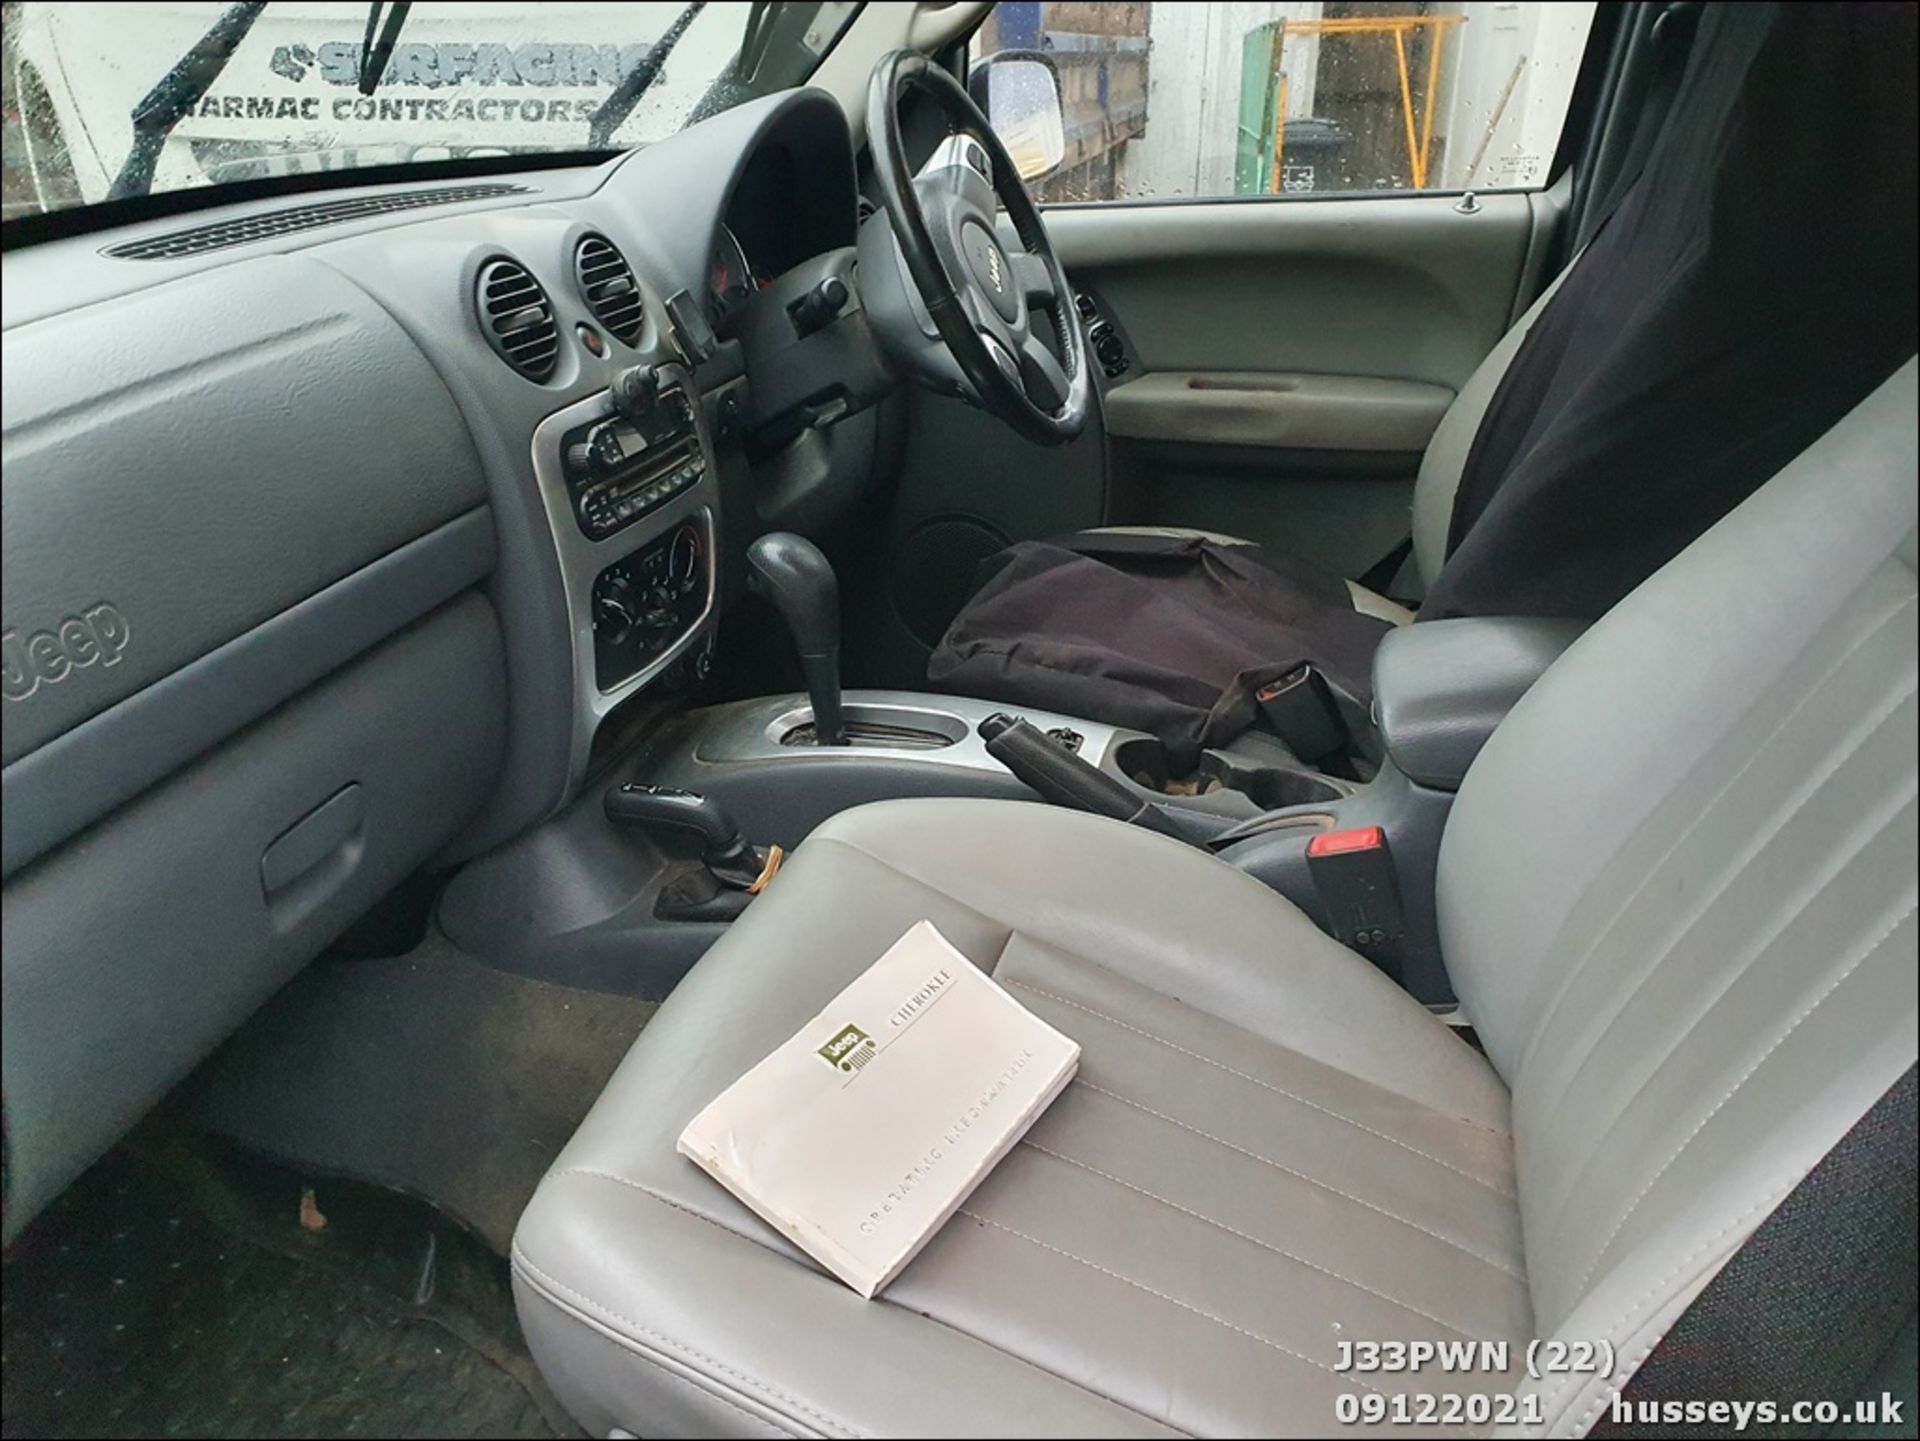 2005 JEEP CHEROKEE LIMITED CRD A - 2766cc 5dr Estate (Blue, 174k) - Image 22 of 28